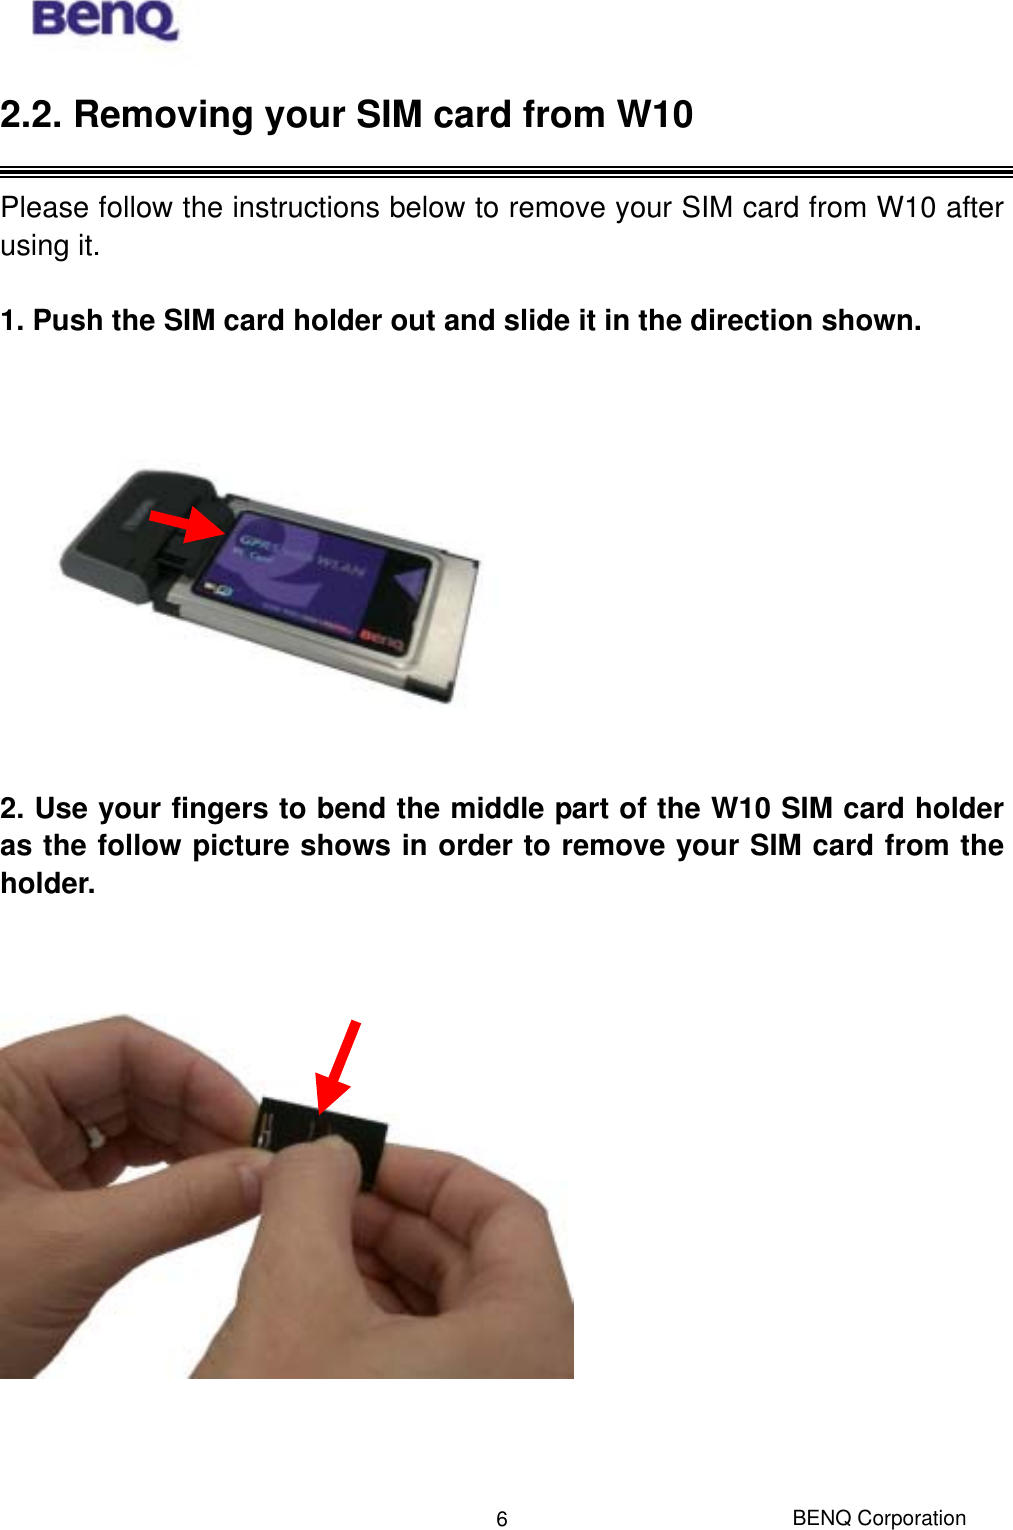  BENQ Corporation 62.2. Removing your SIM card from W10  Please follow the instructions below to remove your SIM card from W10 after using it.  1. Push the SIM card holder out and slide it in the direction shown.    2. Use your fingers to bend the middle part of the W10 SIM card holder as the follow picture shows in order to remove your SIM card from the holder.    